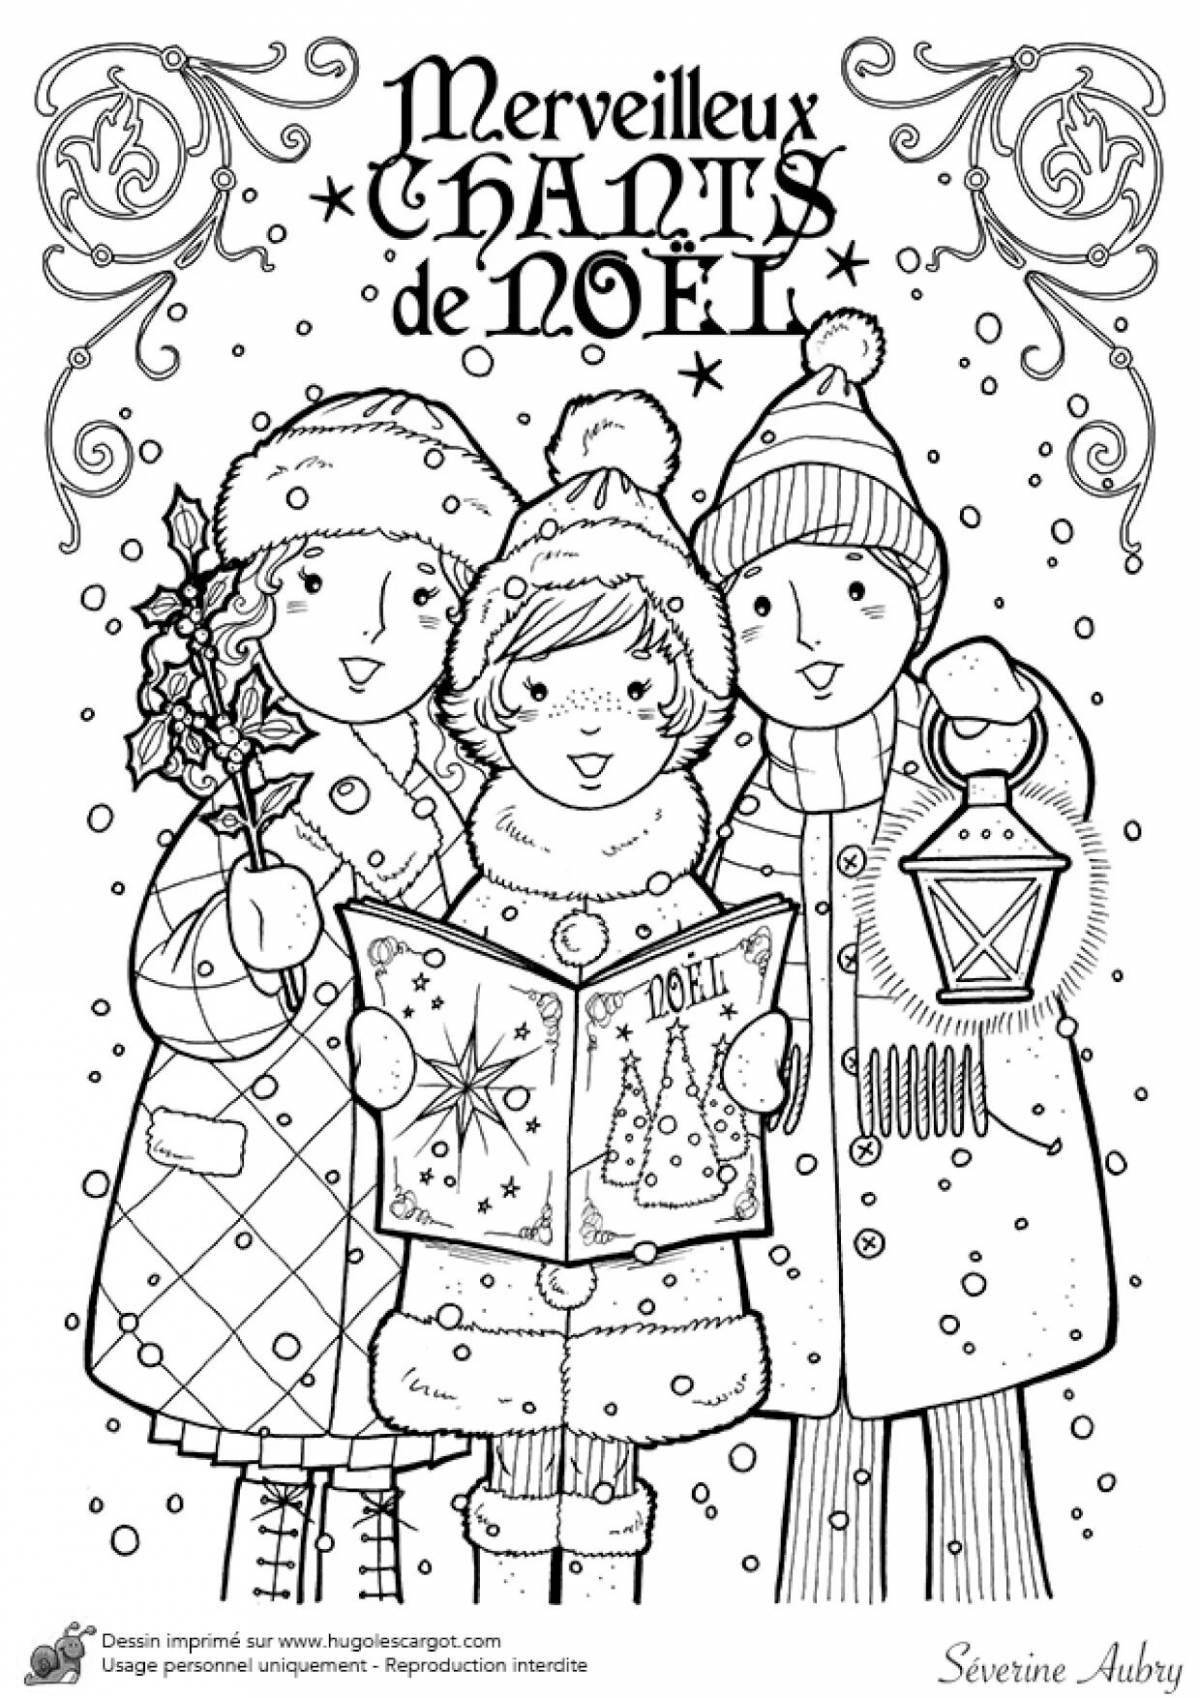 Great carol coloring pages for kids 6 7